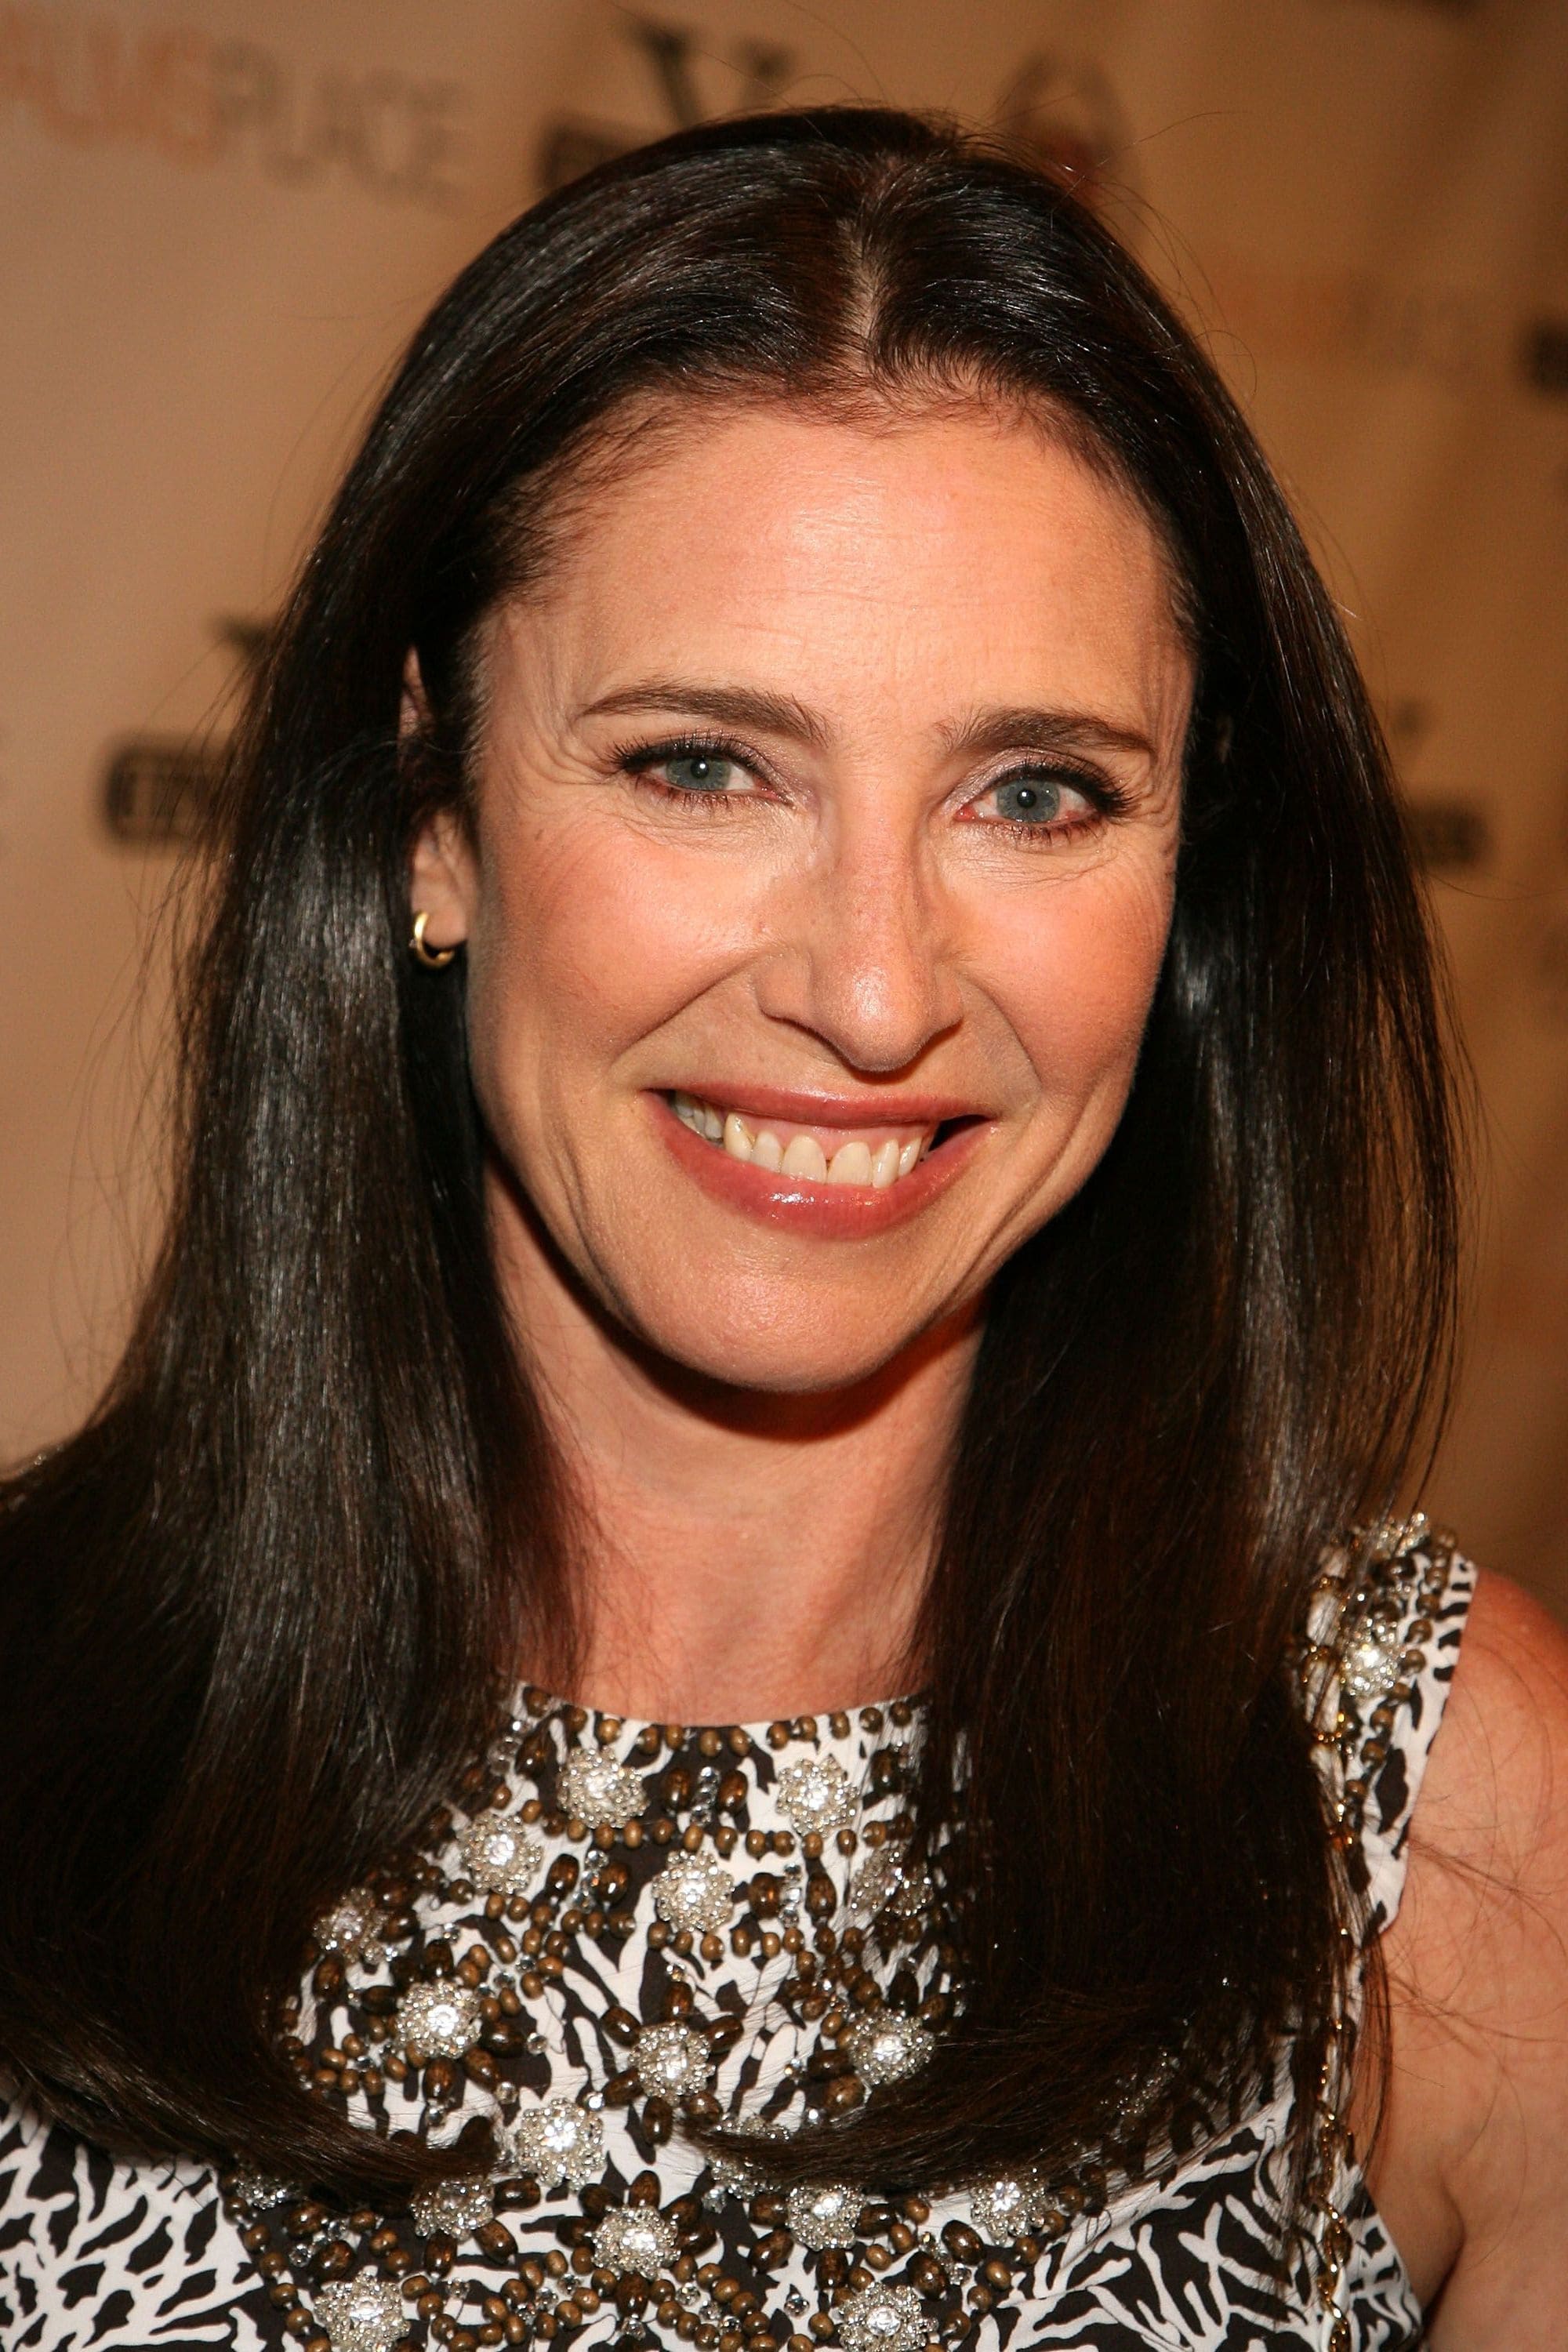 Mimi Rogers 67, 1956, Age, Born, Height, Children, Family, Biography